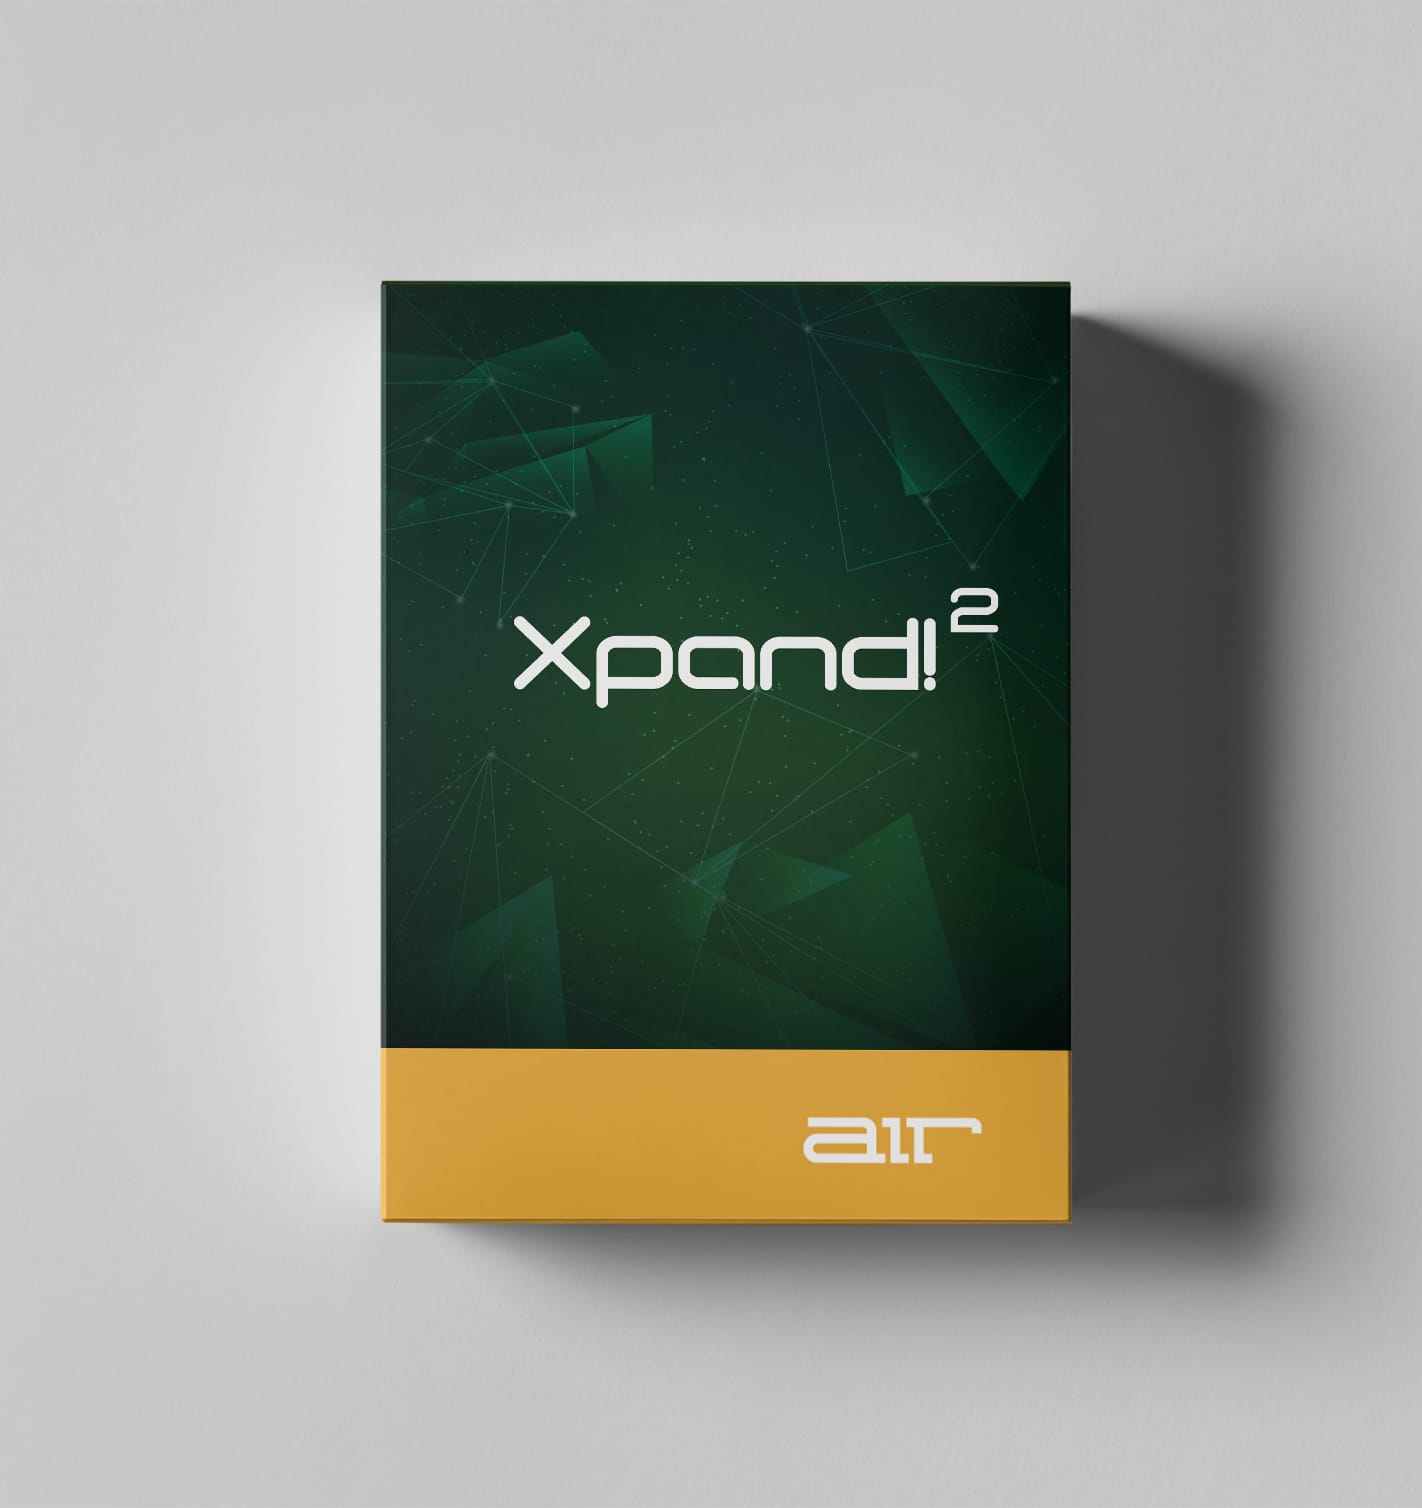 Xpand 2 v2.2.7 Crack 2022 Full Version Free Download New Copy Is Here